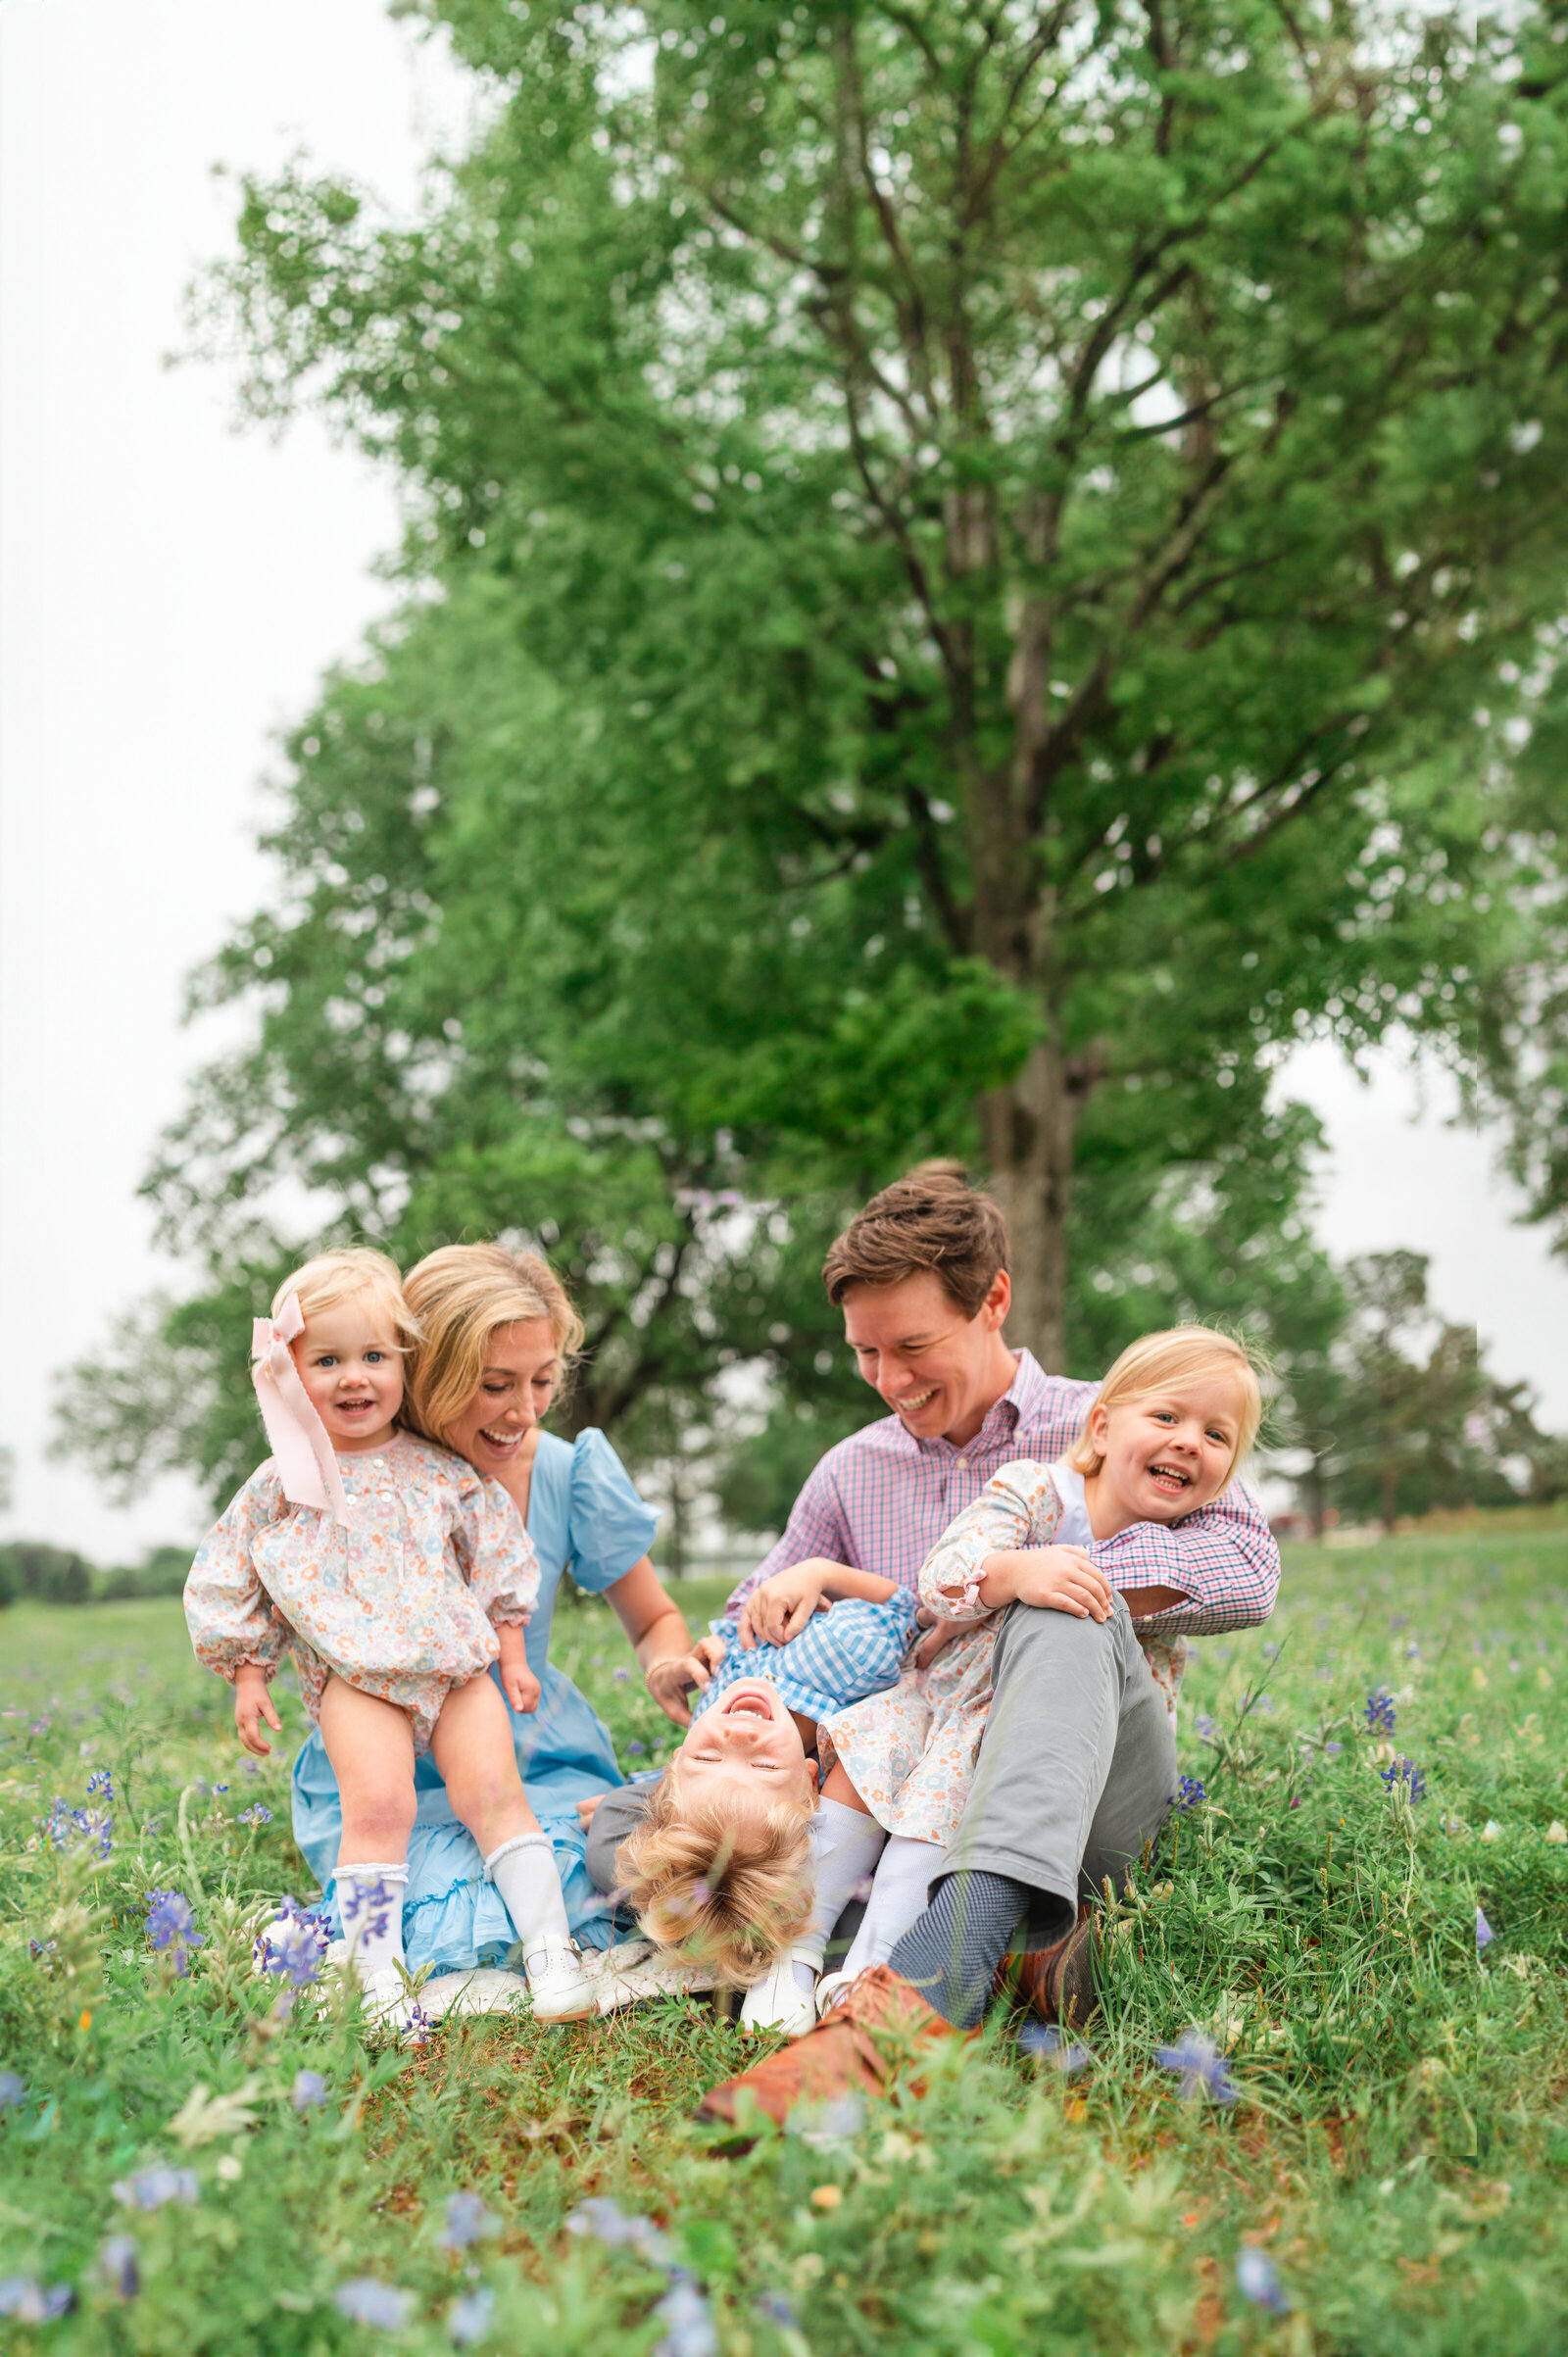 happy family of 5 with three under 5 in a beautiful green outdoors field. Family is under a tree all laughing while they tickle each other in joy